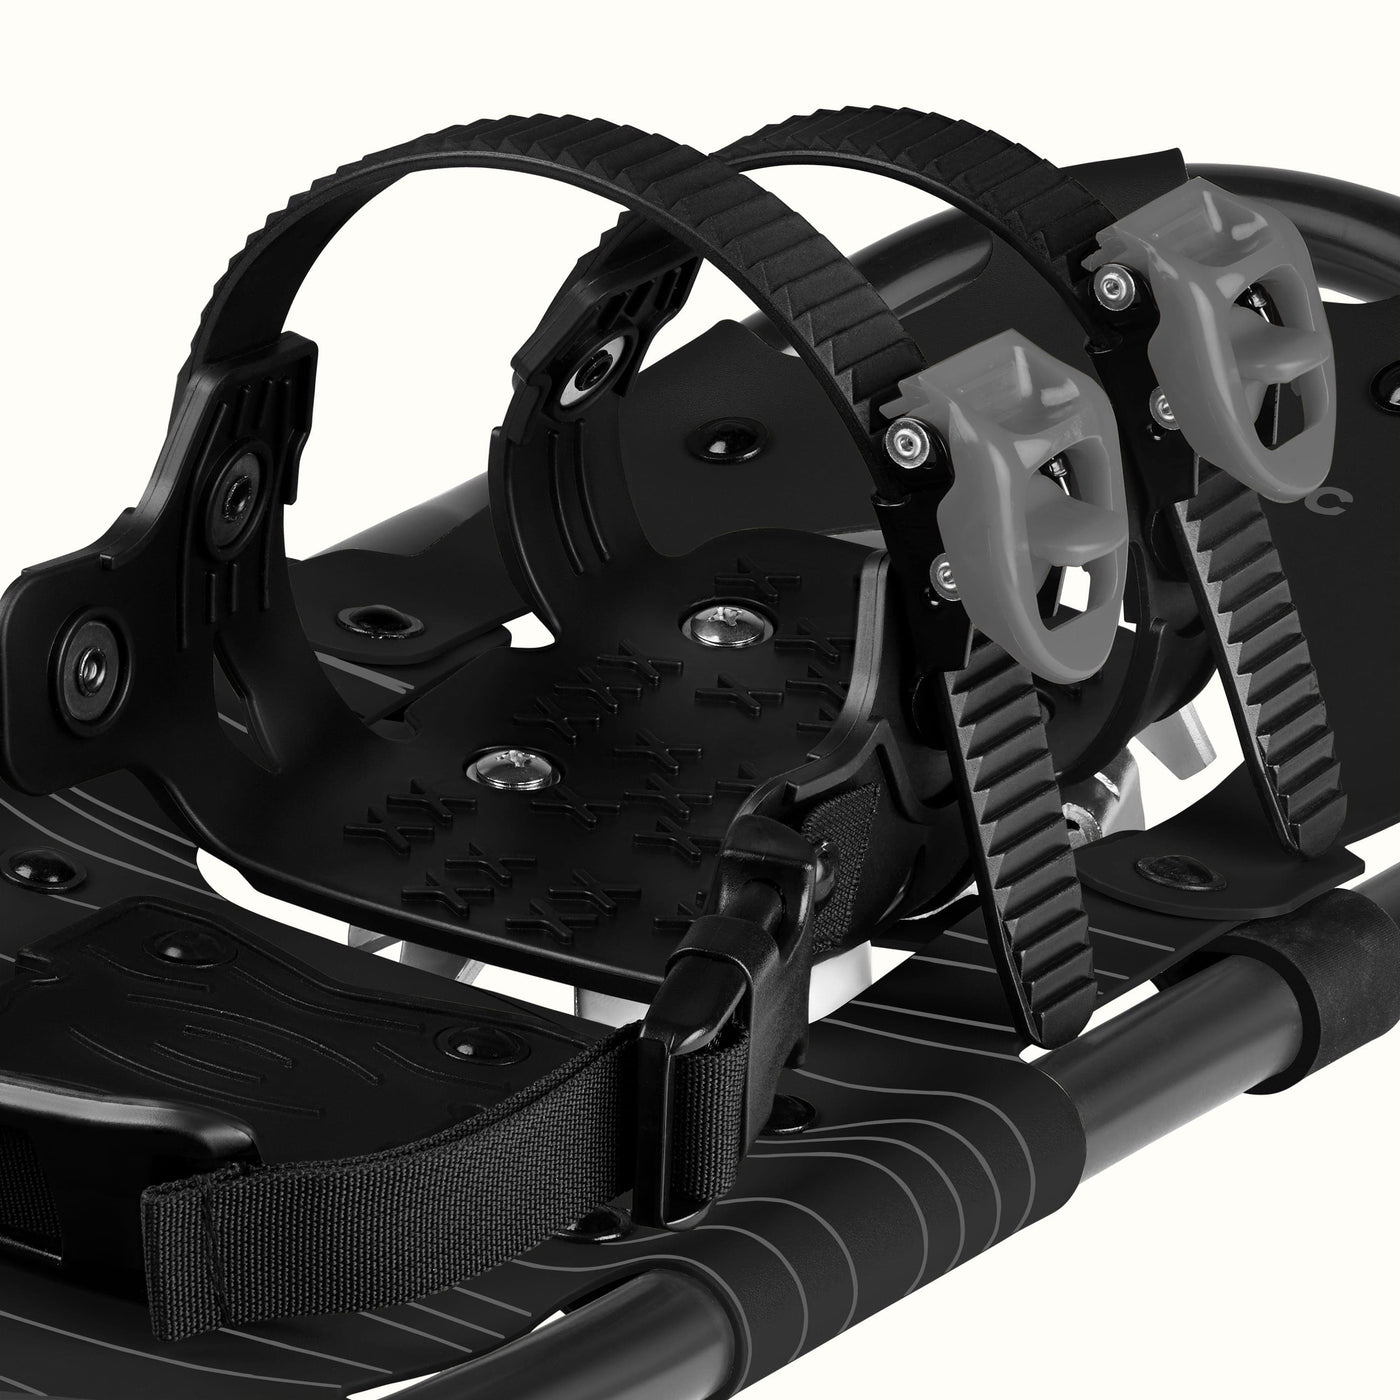 Drifter Lightweight Snowshoes | Black Ice 21 in (80-120lbs)